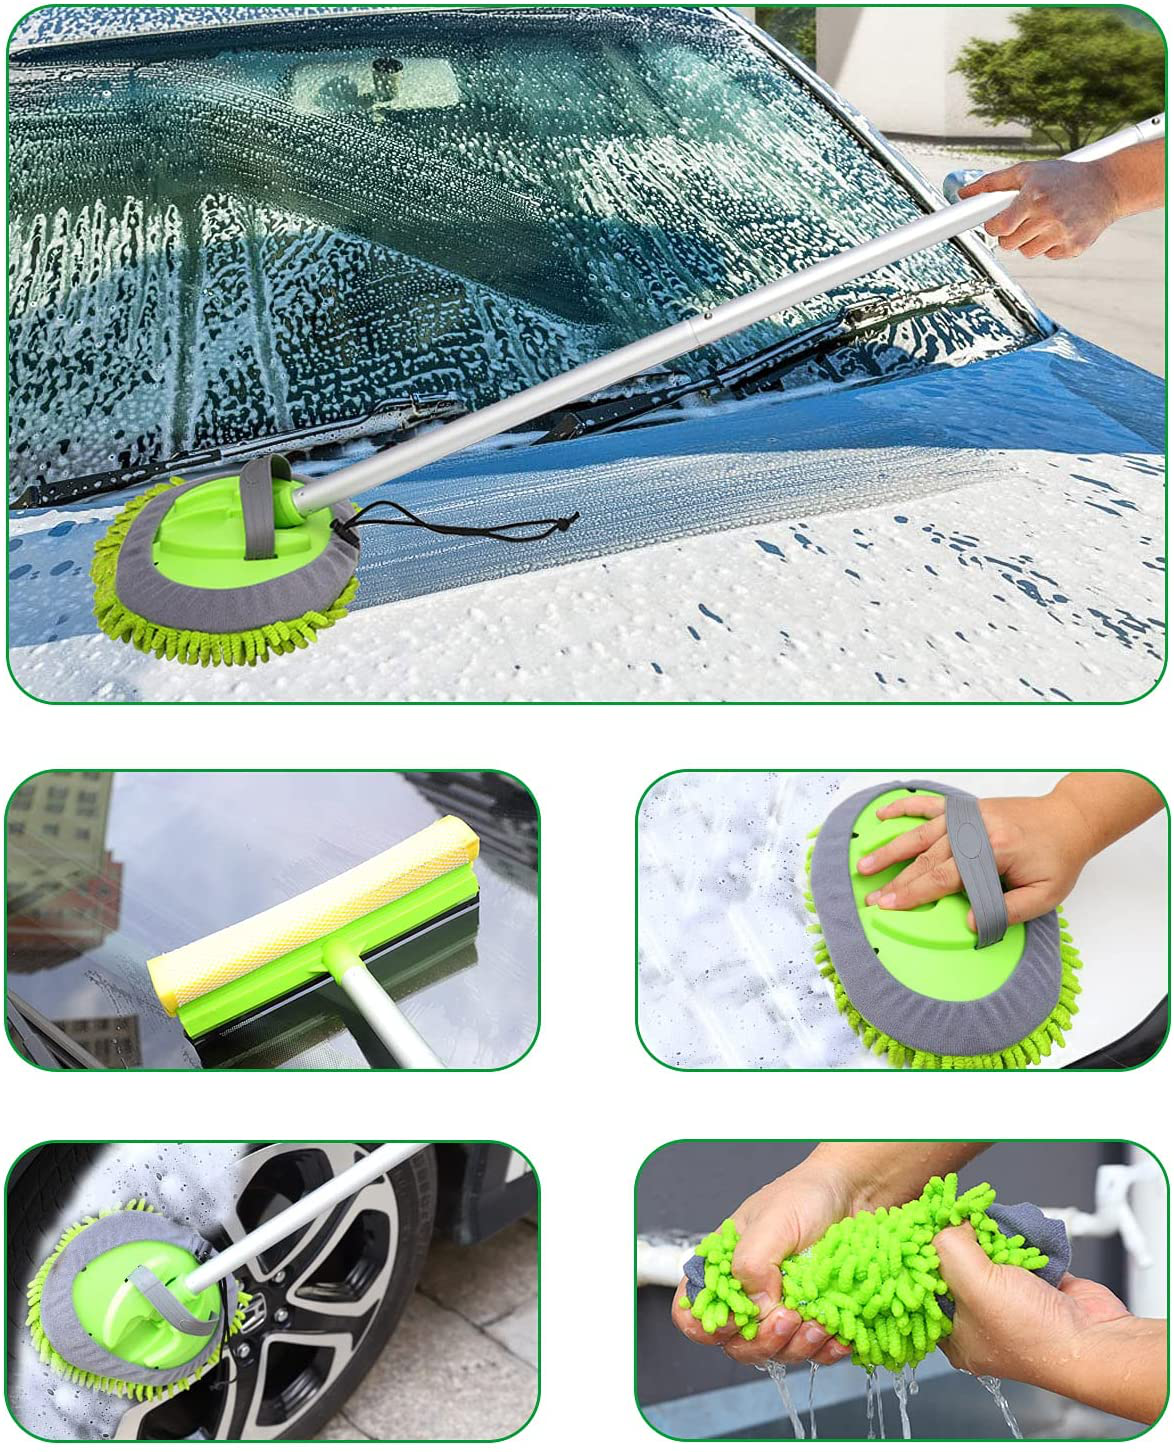 Car Wash Brush with Long Handle, Car Wash Mop with 45" Aluminum Alloy Long Handle,2 Chenille Microfiber Car Wash Brush Head,2 in 1 Car Drying Squeegee Sponge, 3 Mop Pole,3 in 1 Car Cleaning Tools